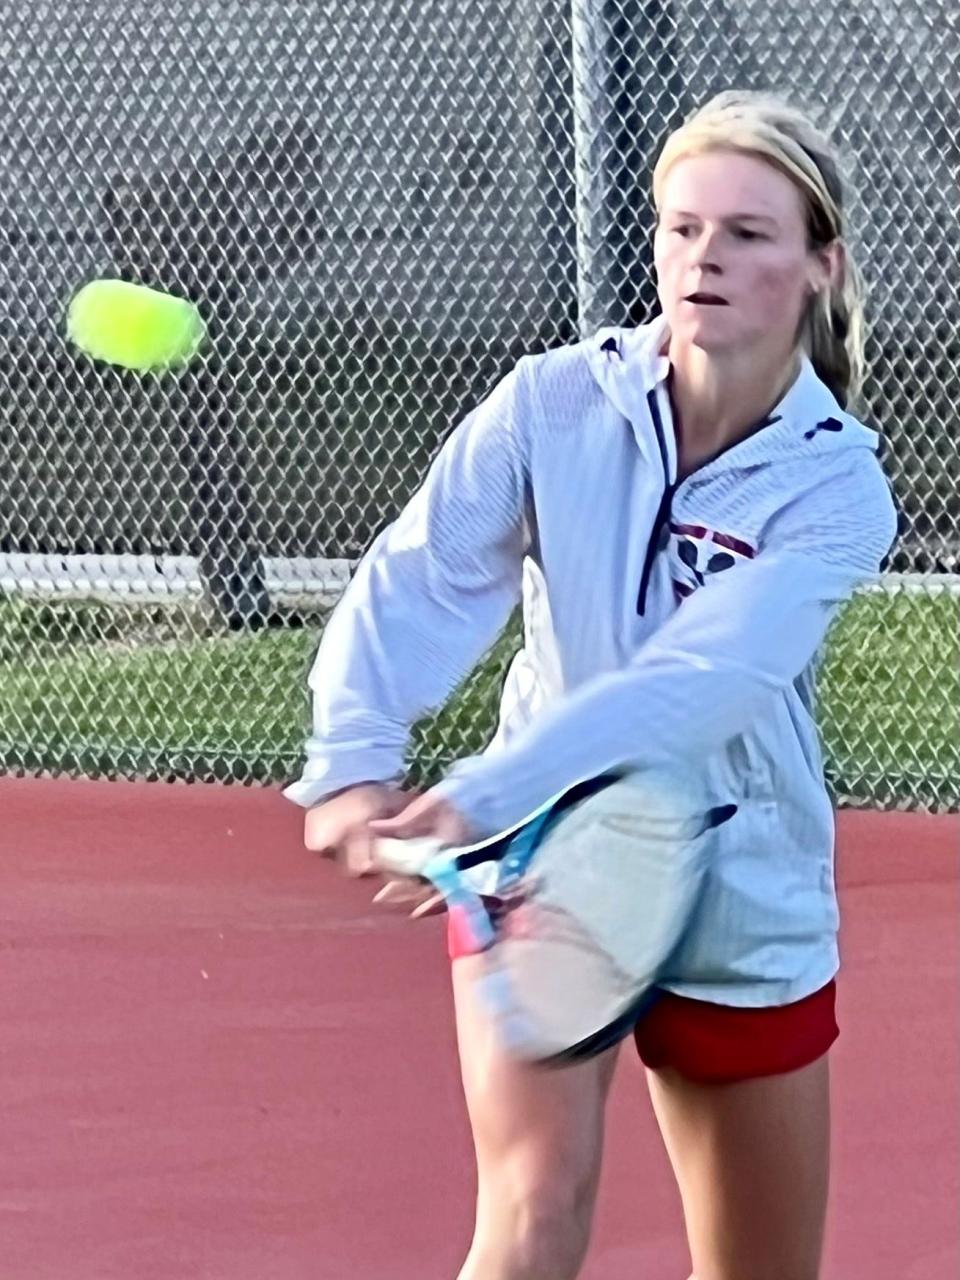 Marion Harding's Taryn Simmers uses a backhand to return a shot during a girls tennis match at Pleasant this season. Simmers was named Fahey Bank Athlete of the Month for August among Marion County girls.